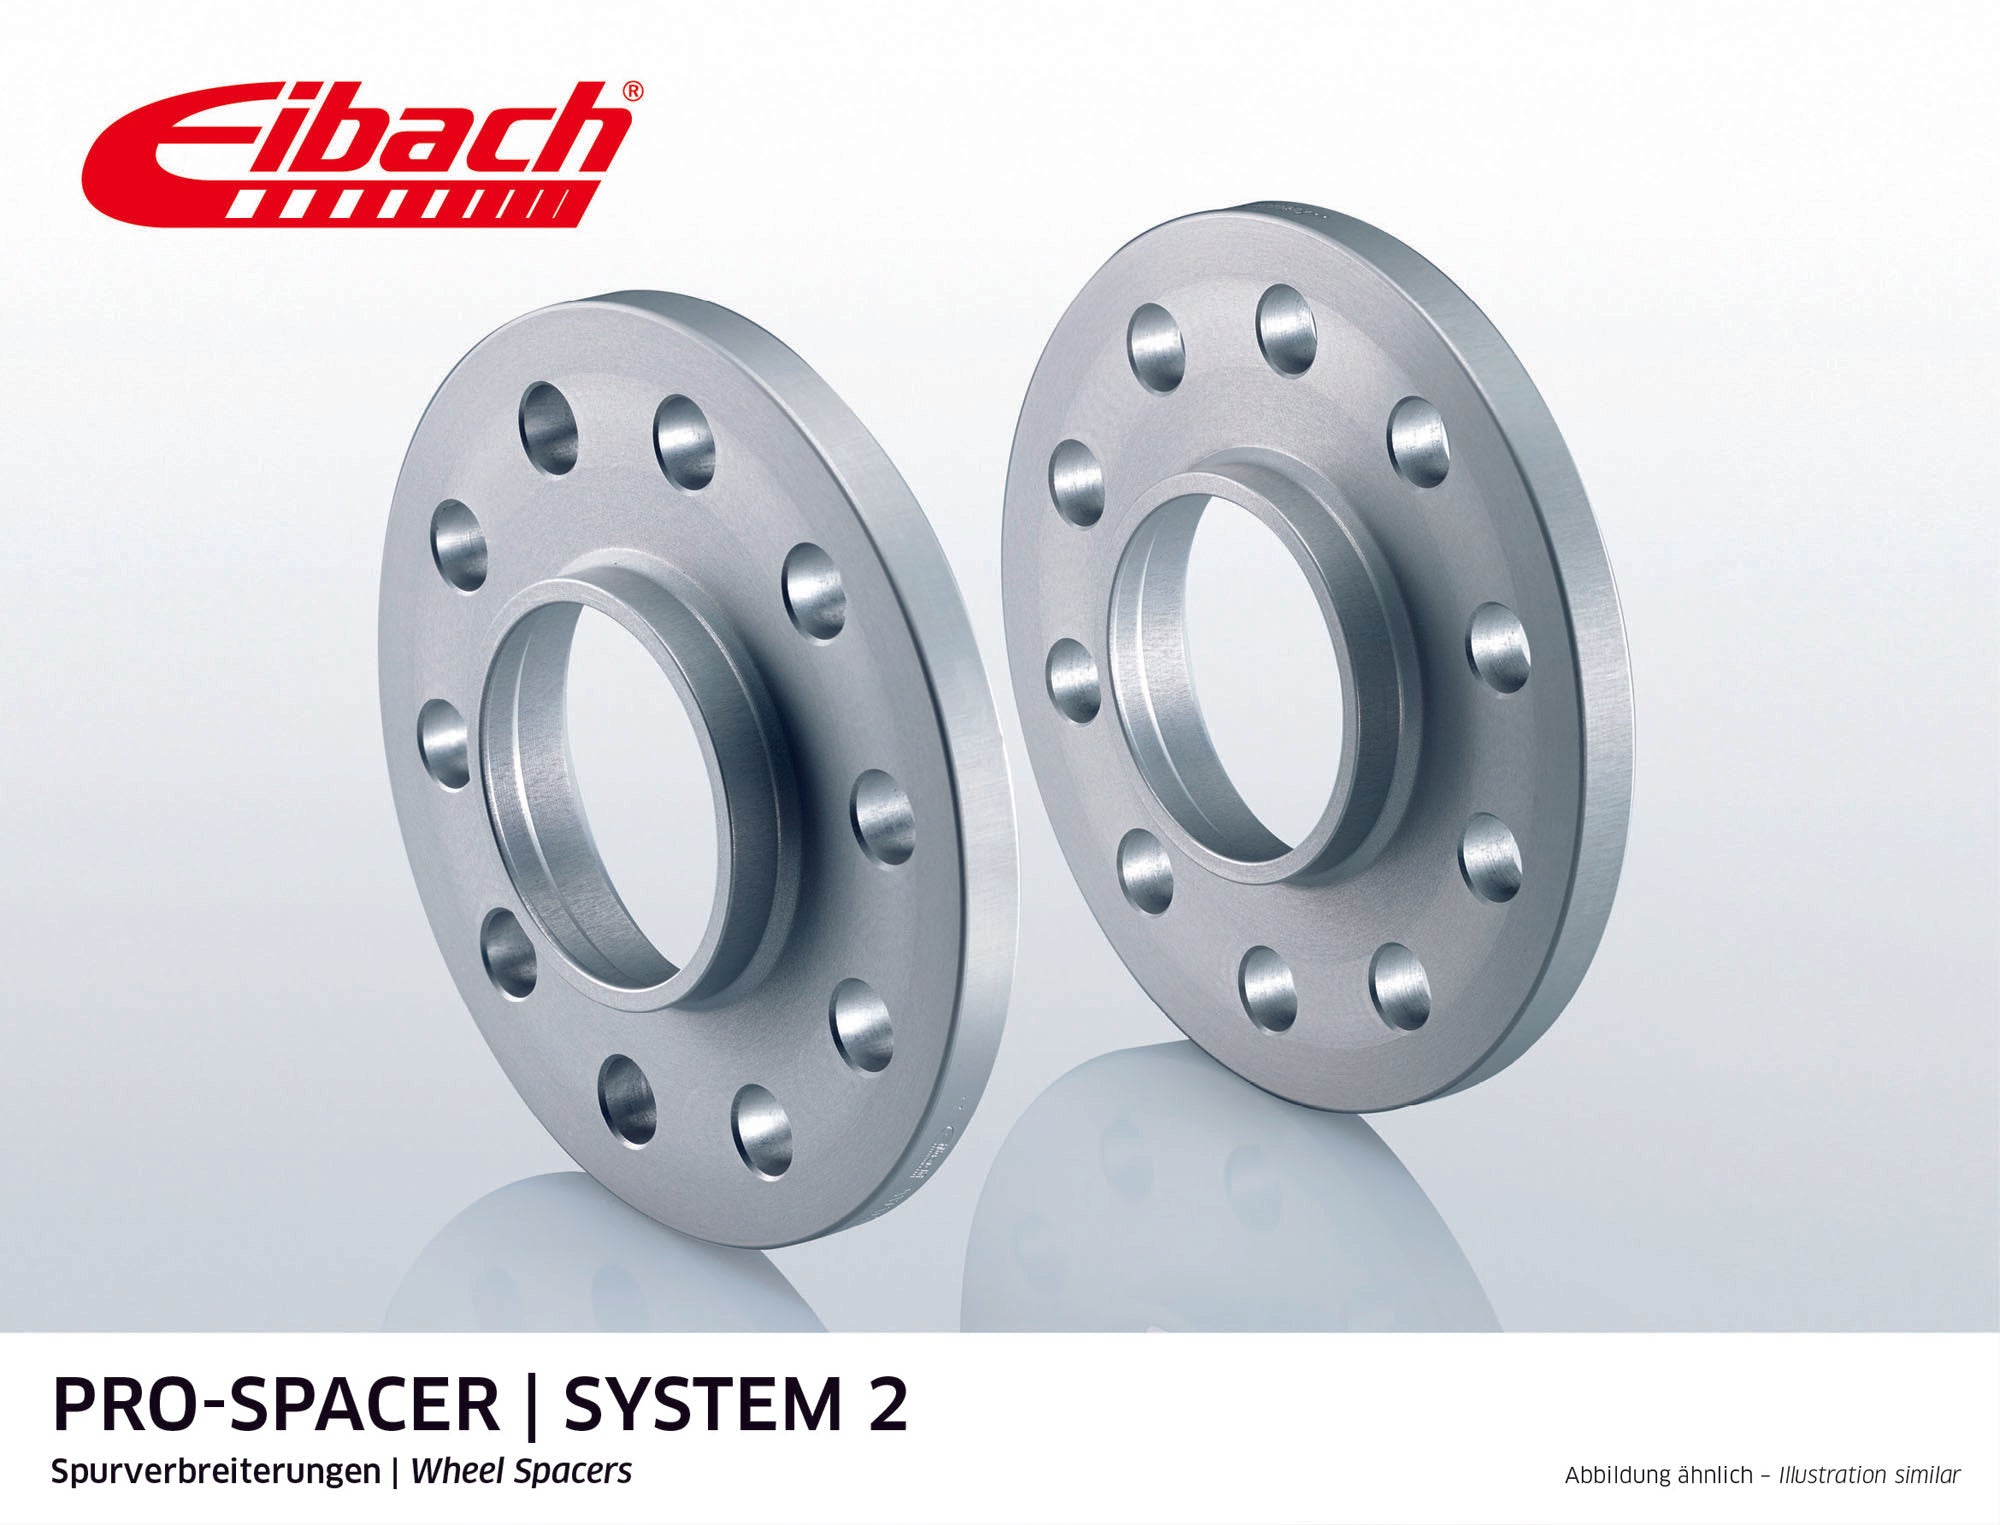 Eibach 23mm Pro-Spacer - Silver Anodized Wheel Spacer CAYMAN 2005-12 #S90-2-23-001